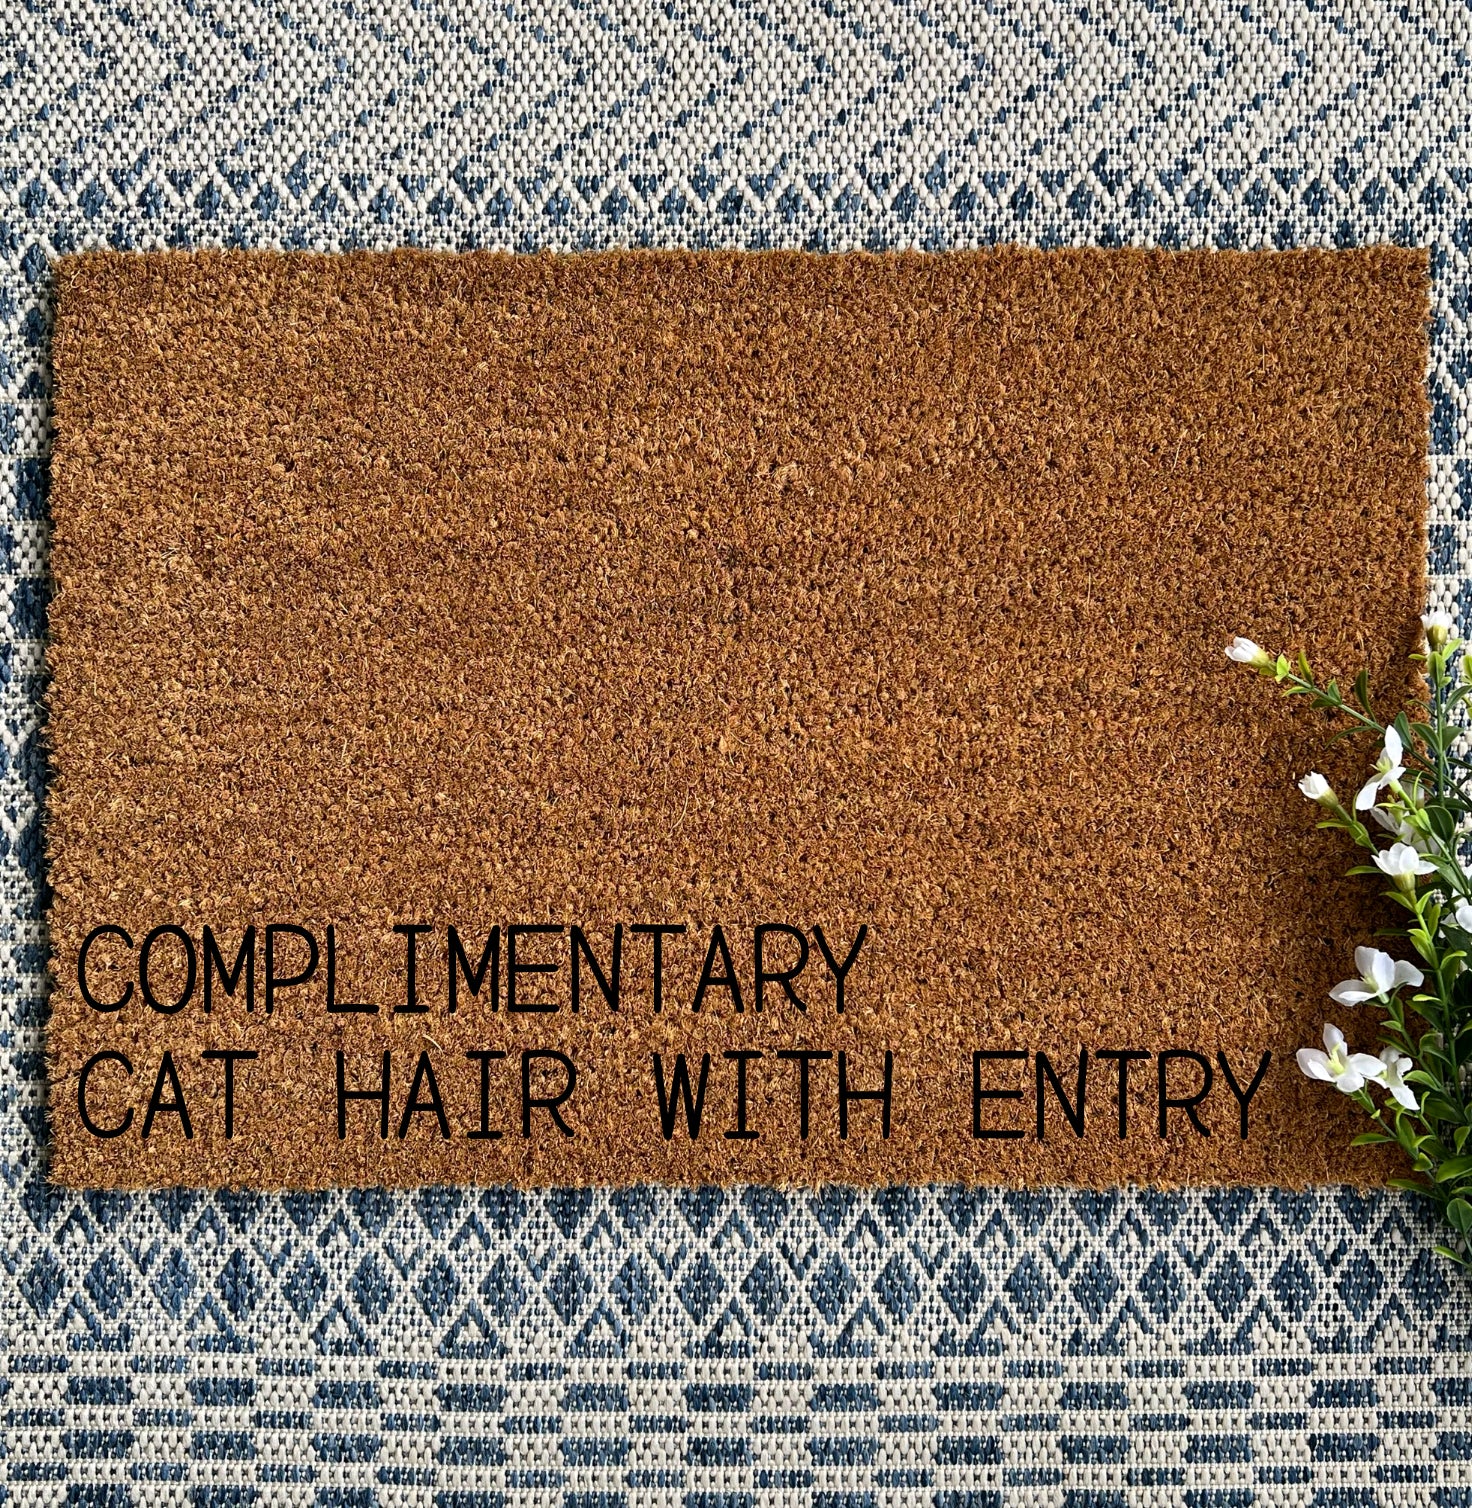 Complimentary Cat Hair With Entry